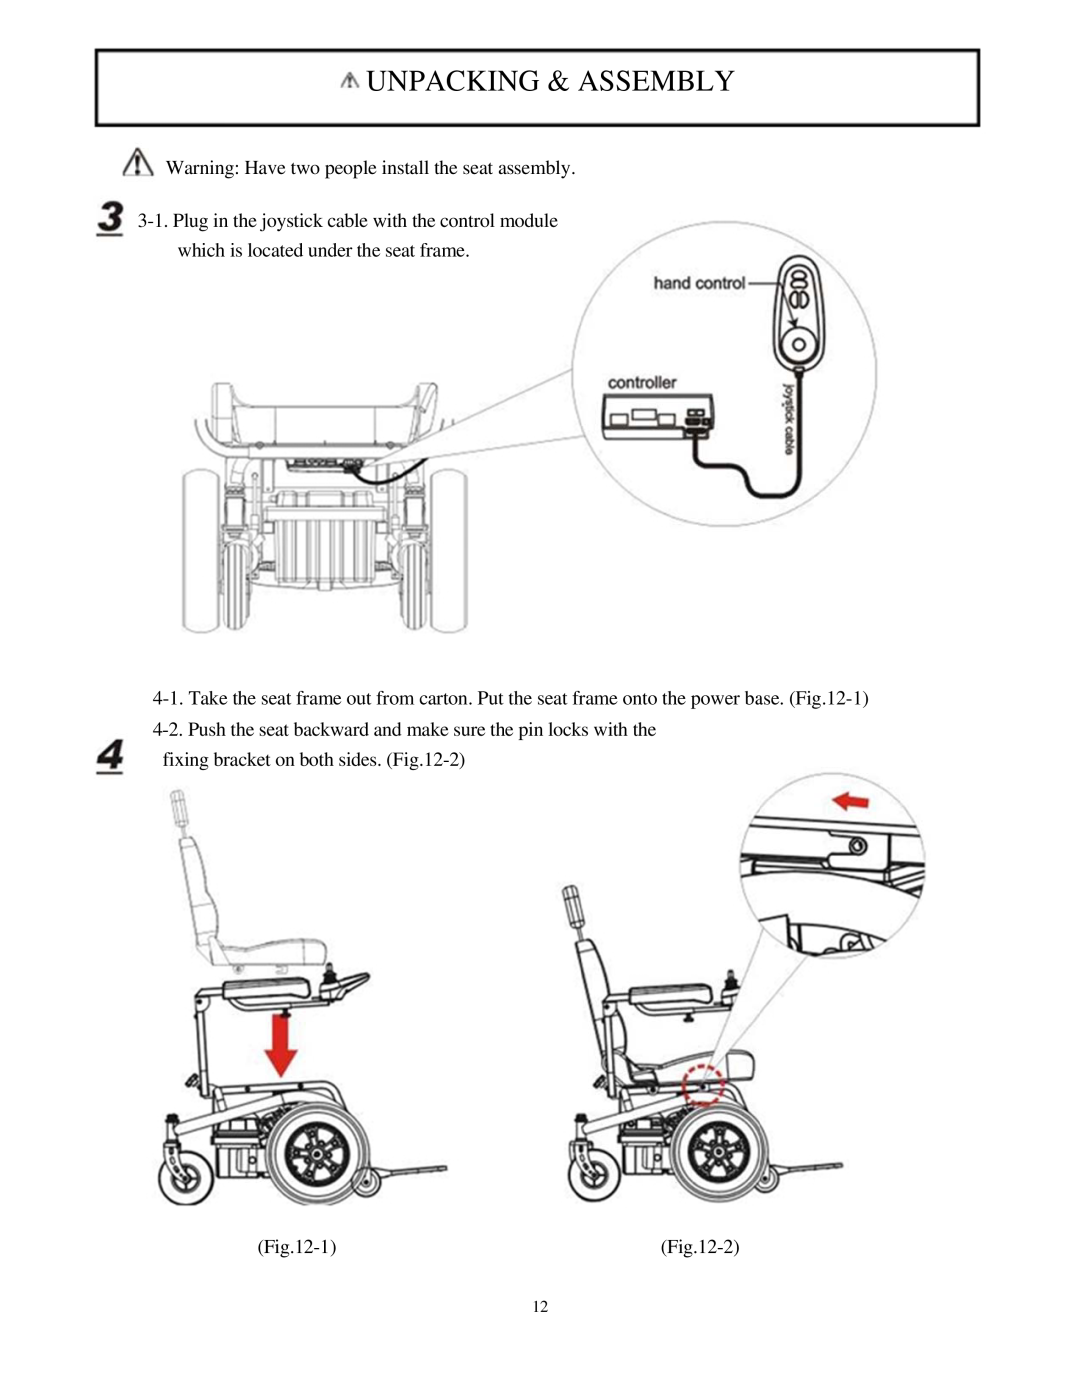 Drive Medical Design 2850-18, 2850-20 manual Unpacking & Assem Bly, Warning Have two people install the seat assembly 